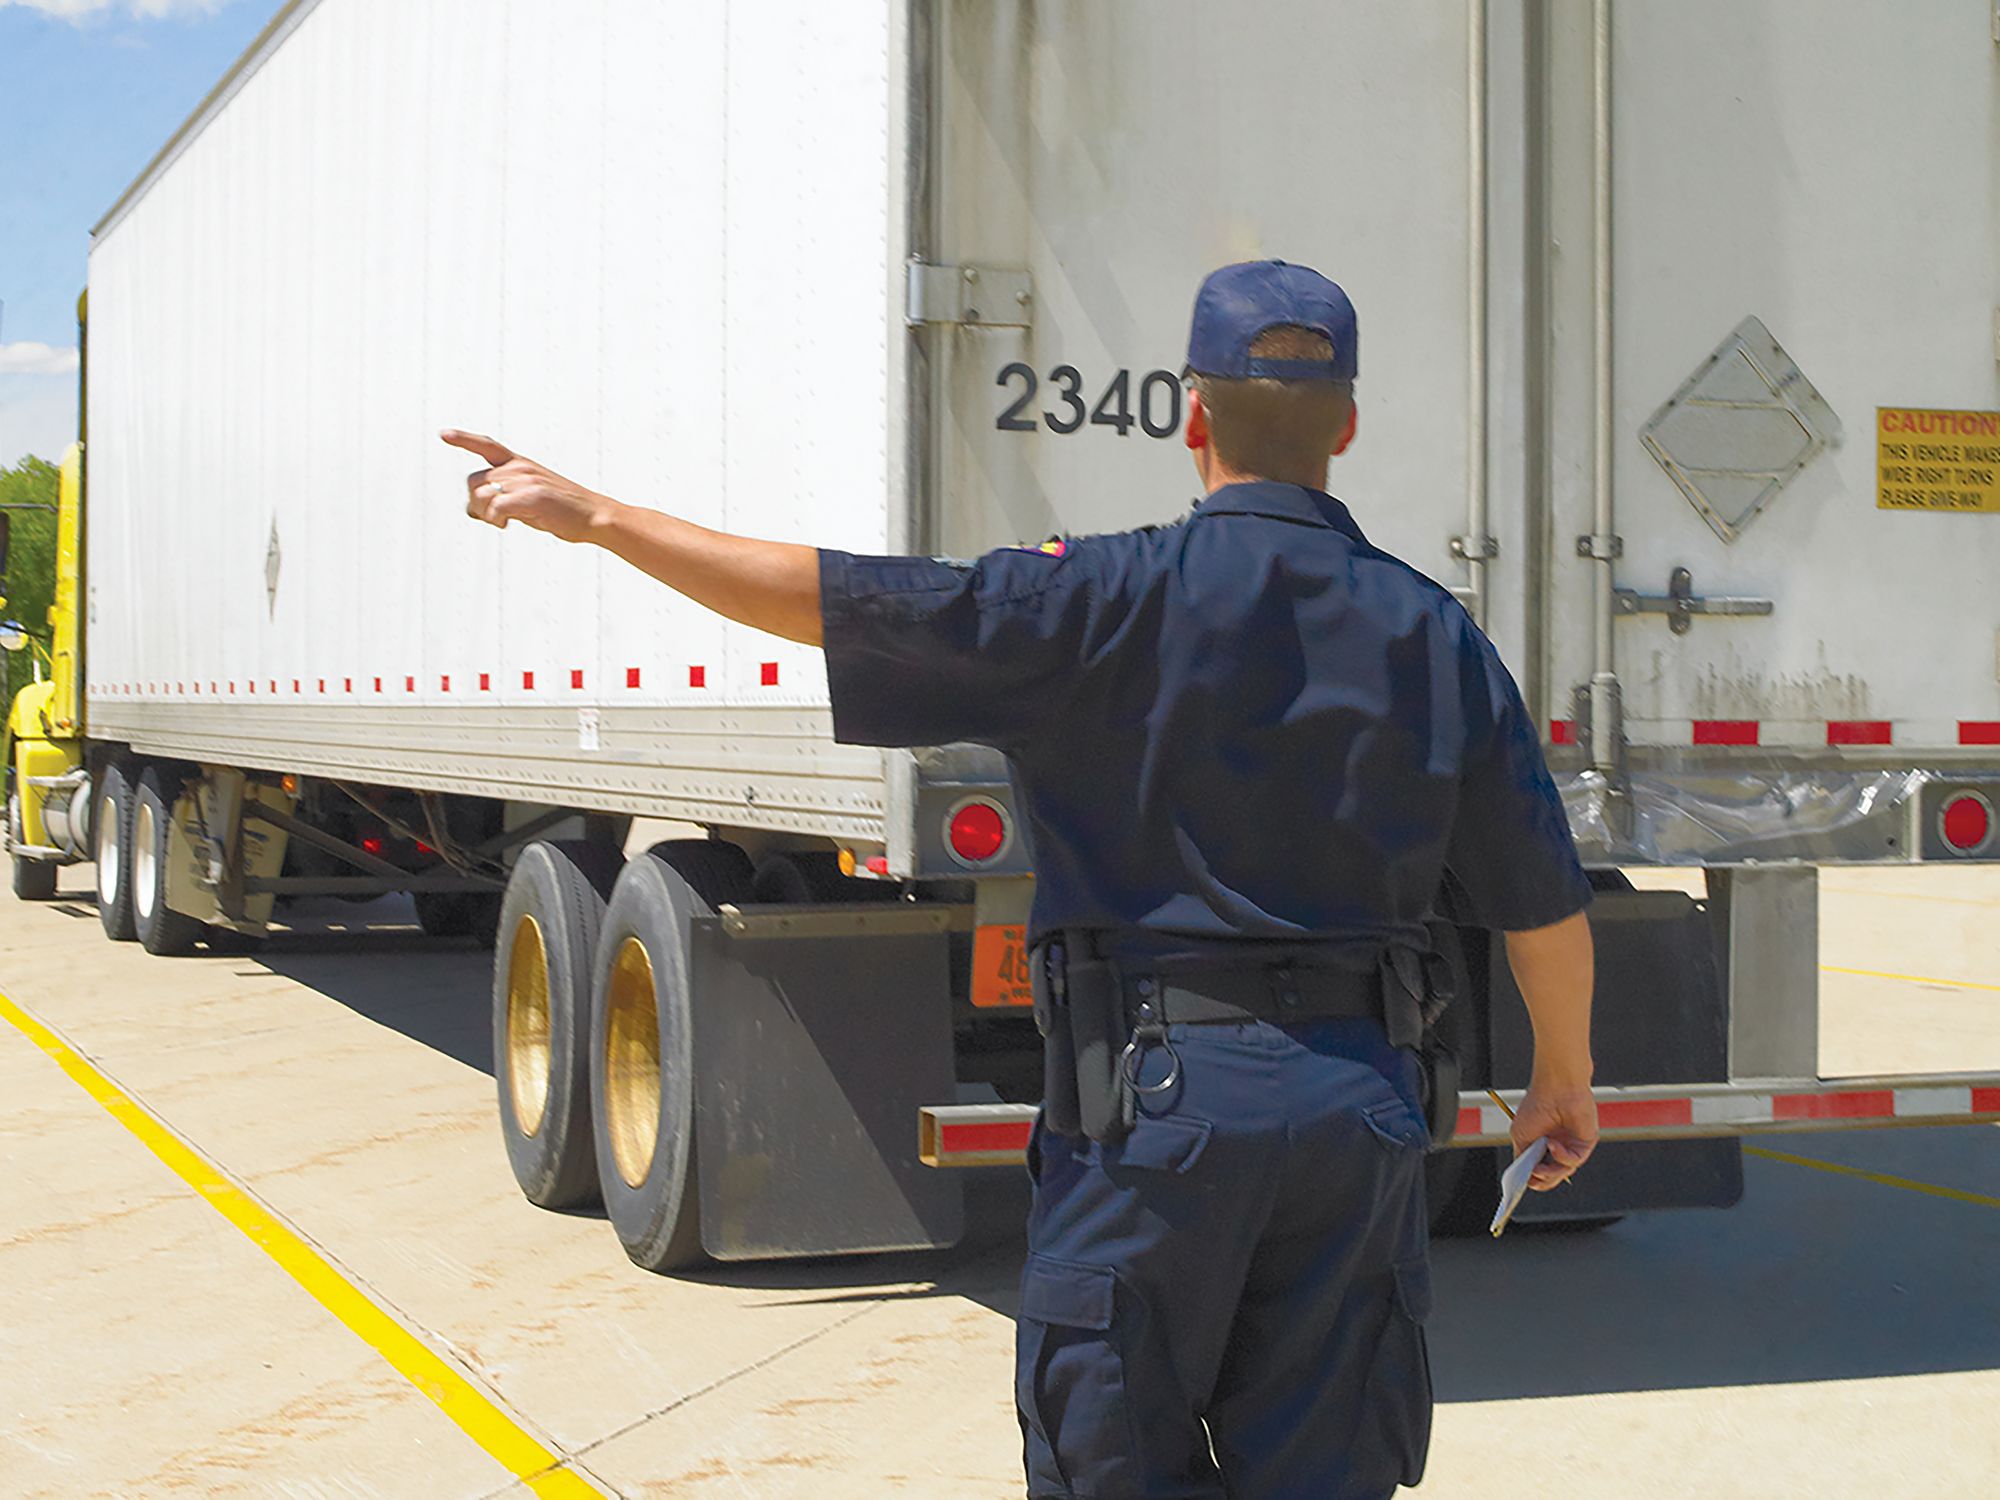 Who is subject to FMCSA enforcement?